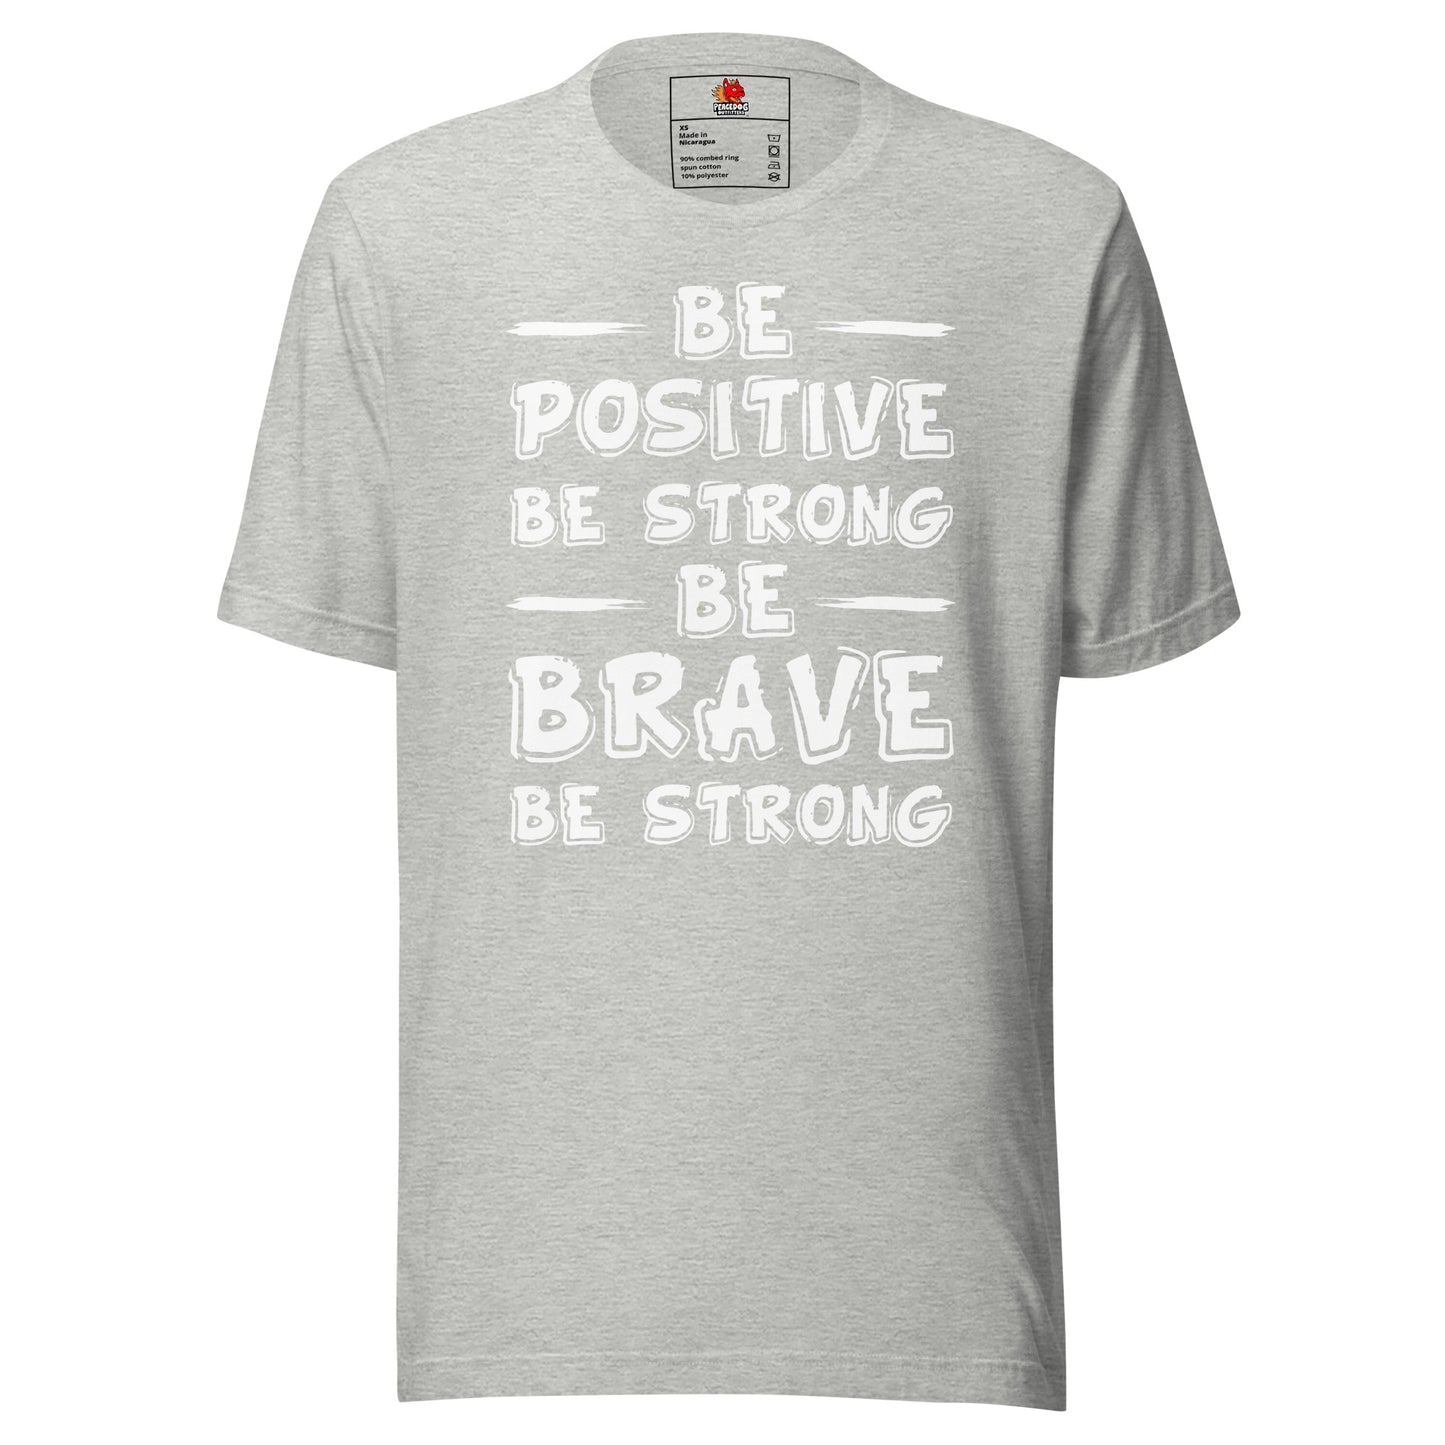 Be Positive, Be Strong, Be Brave T-shirt